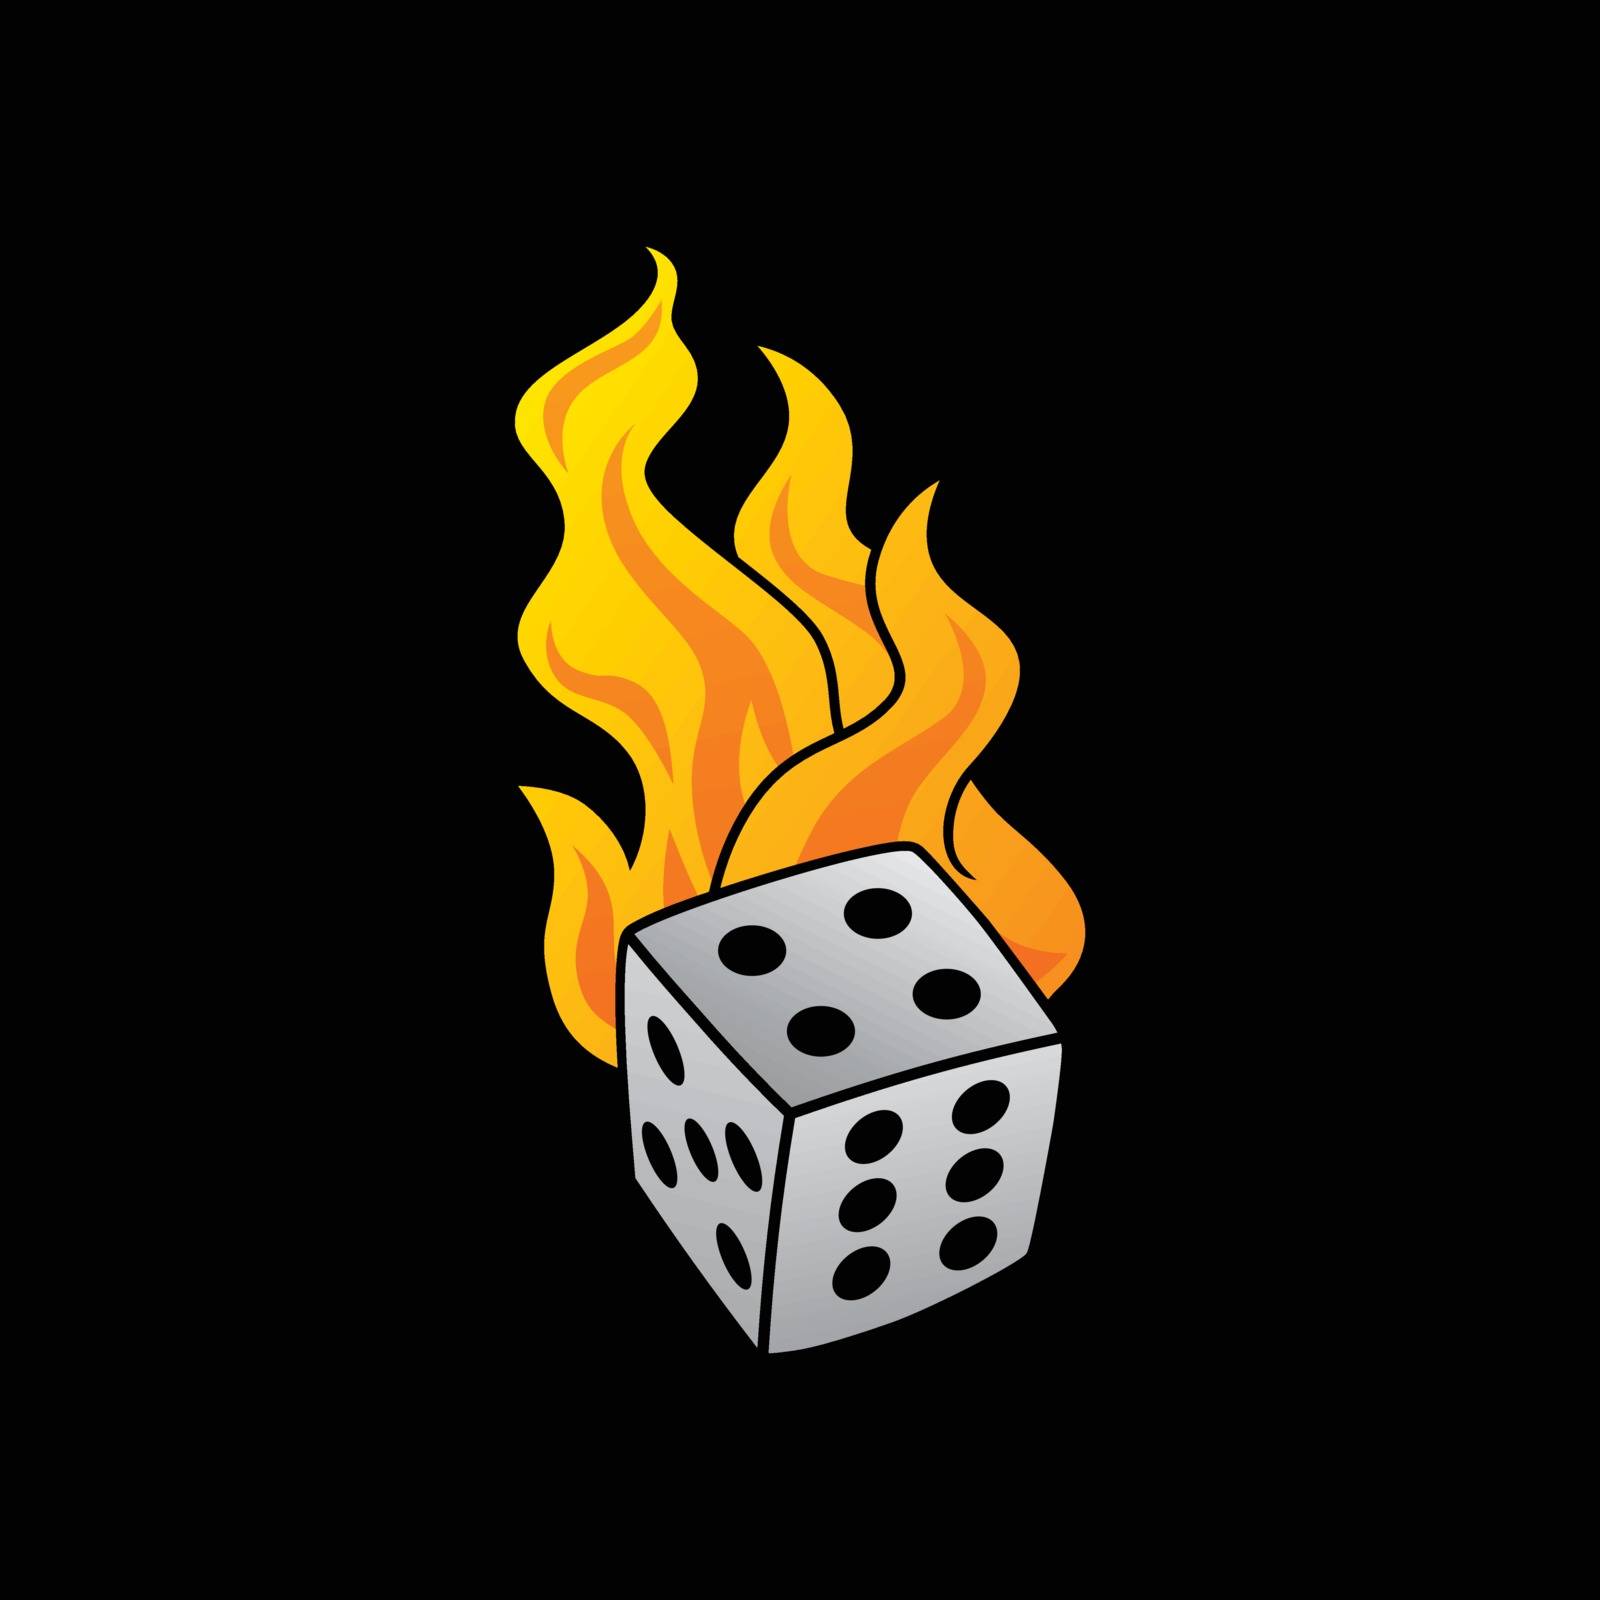 flaming on fire burning white dice risk taker gamble vector art by vector1st